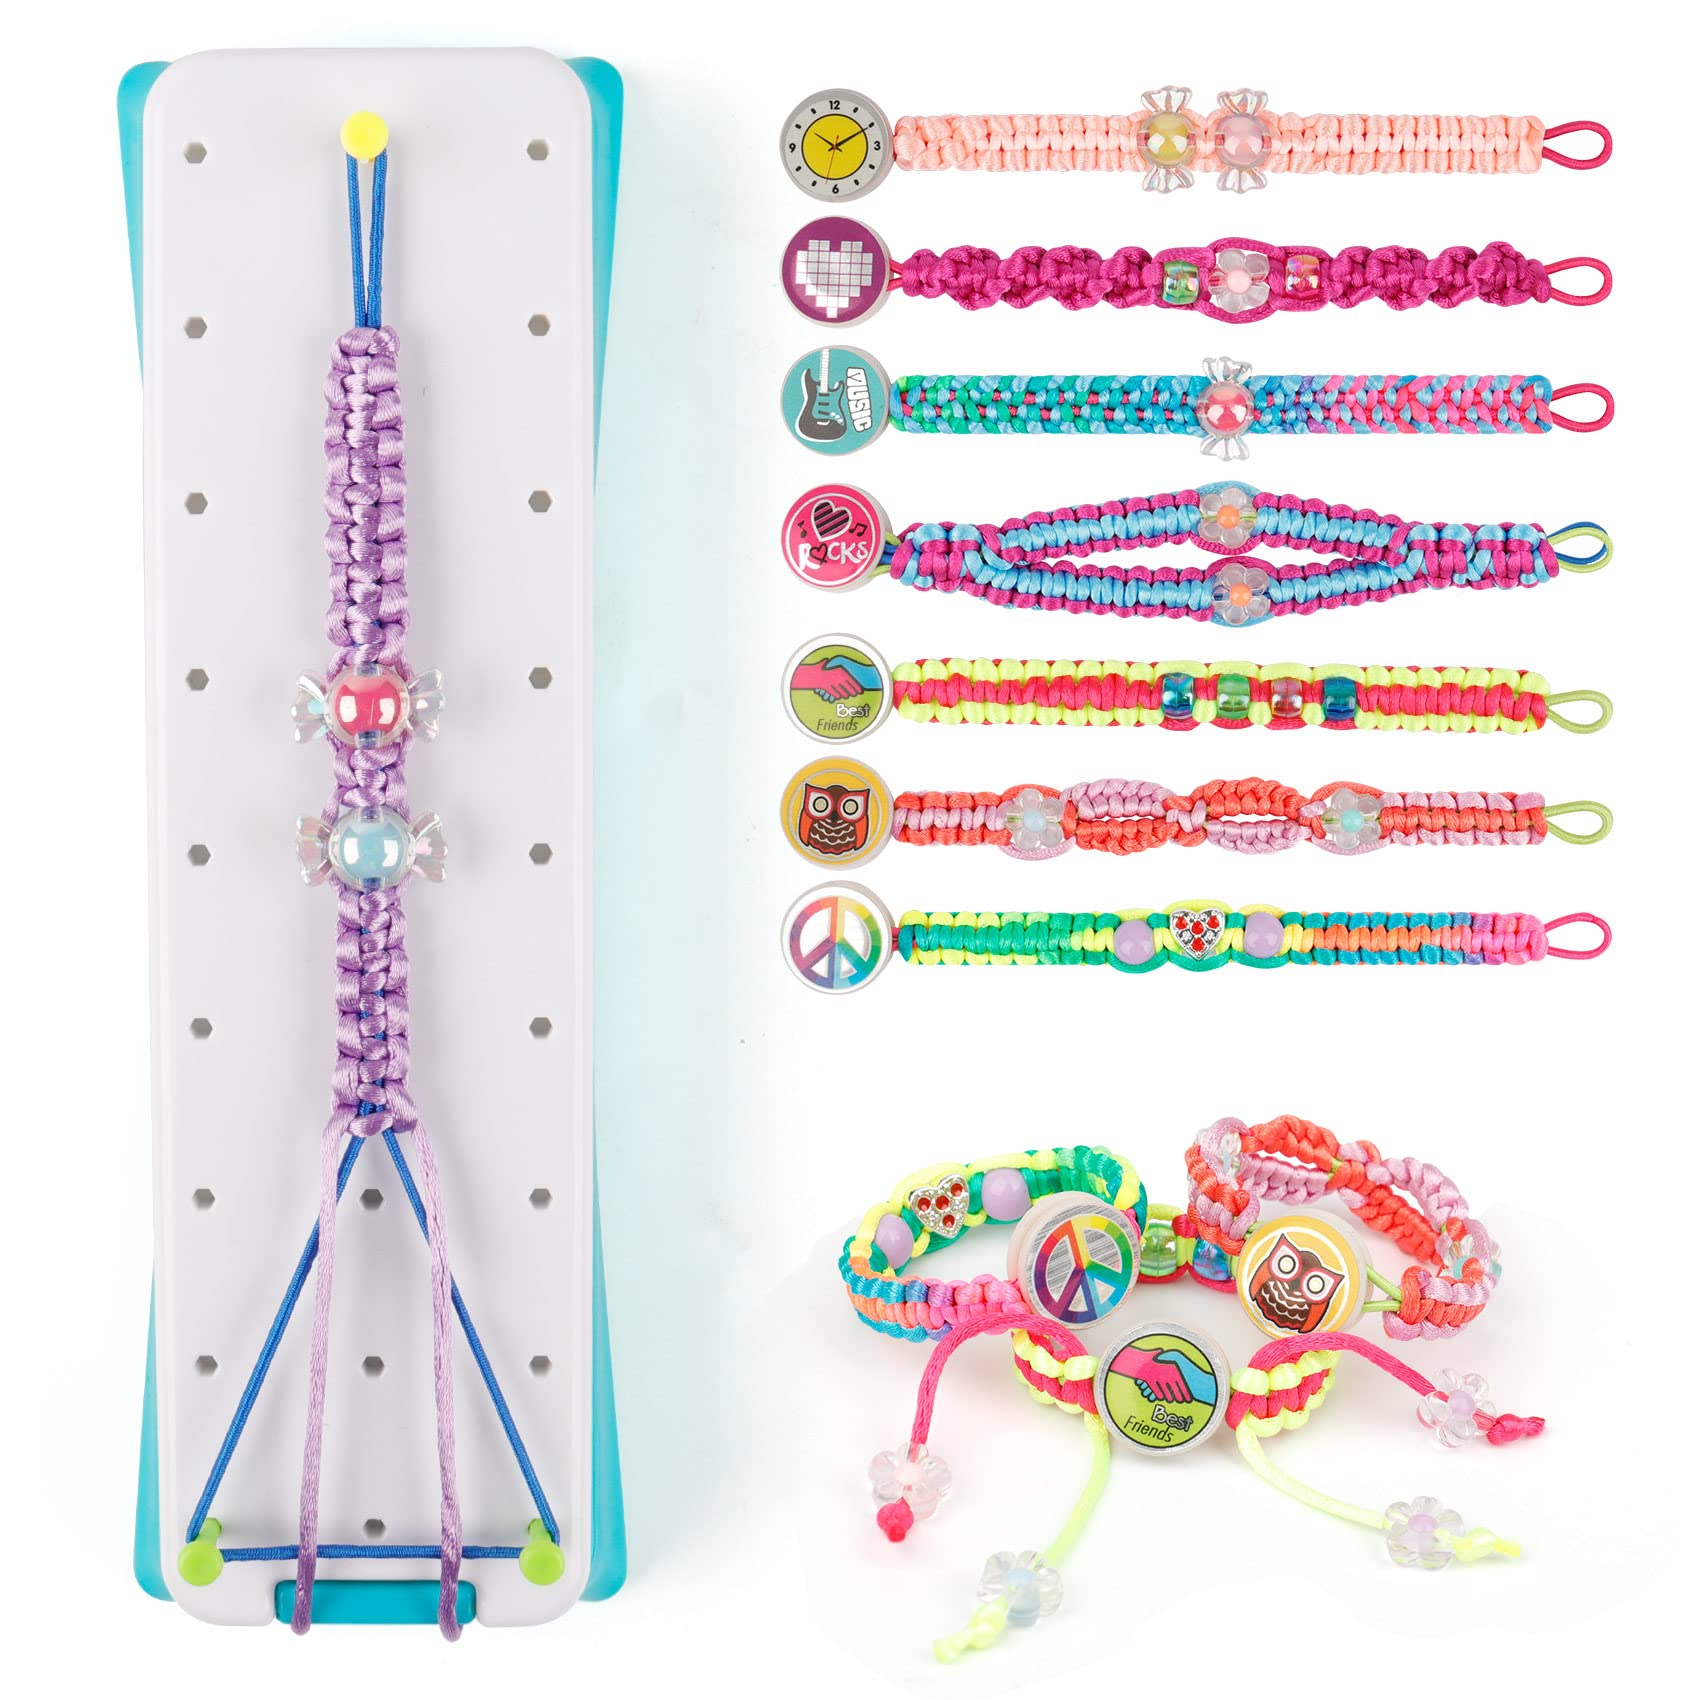 AHCo. Friendship Bracelet Making Kit for girls, Arts and crafts Toys for  8-12 Years Old Kids